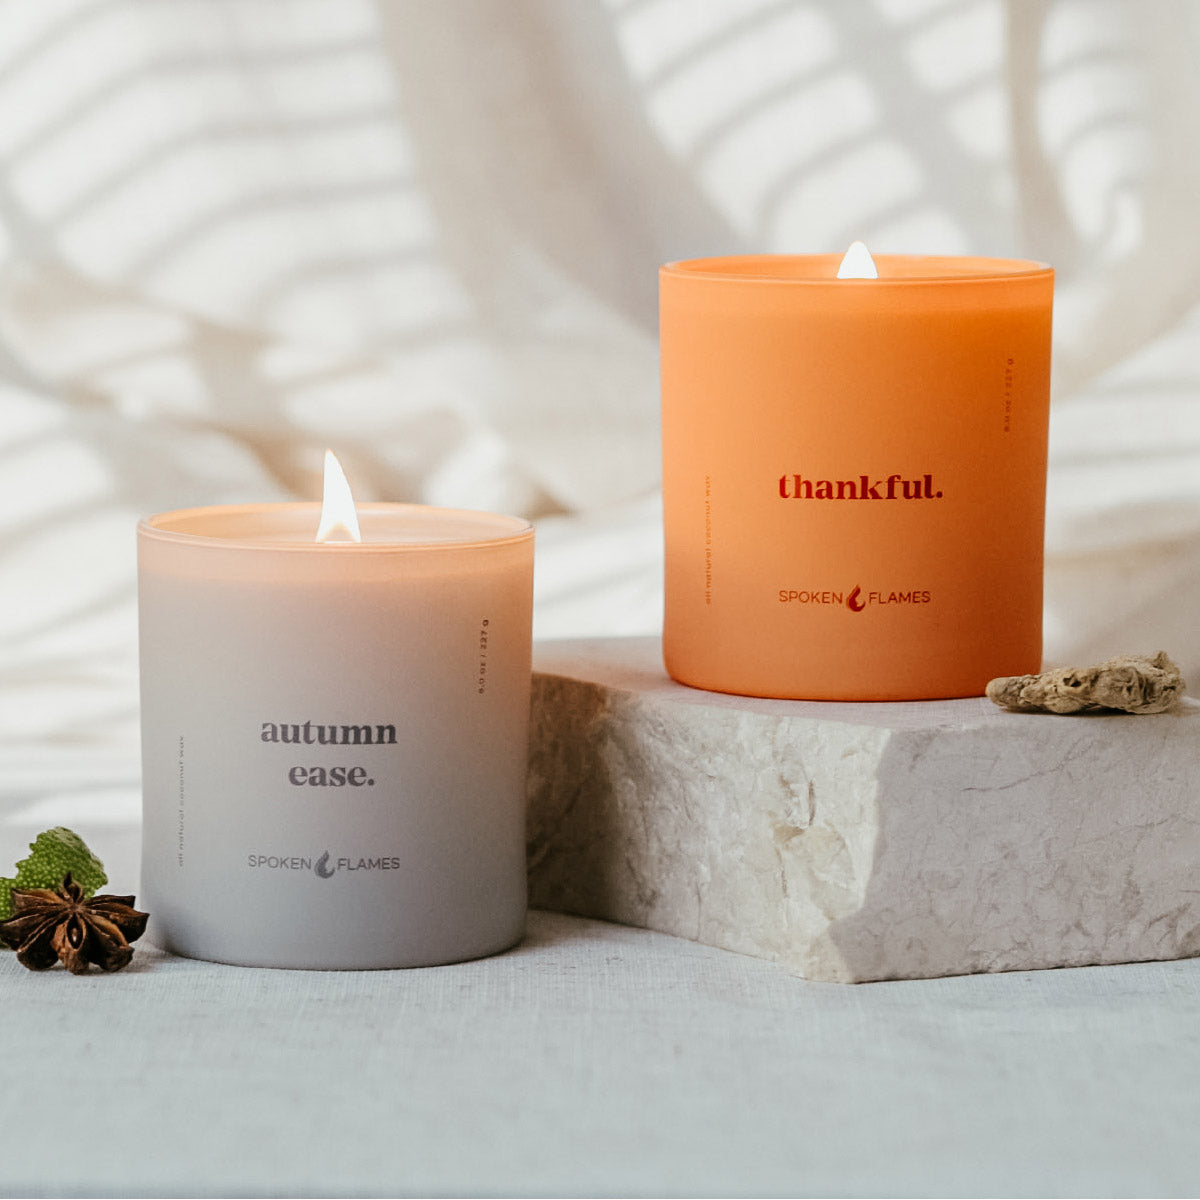 Fall Candles: Autumn Ease Candle and Thankful Candle